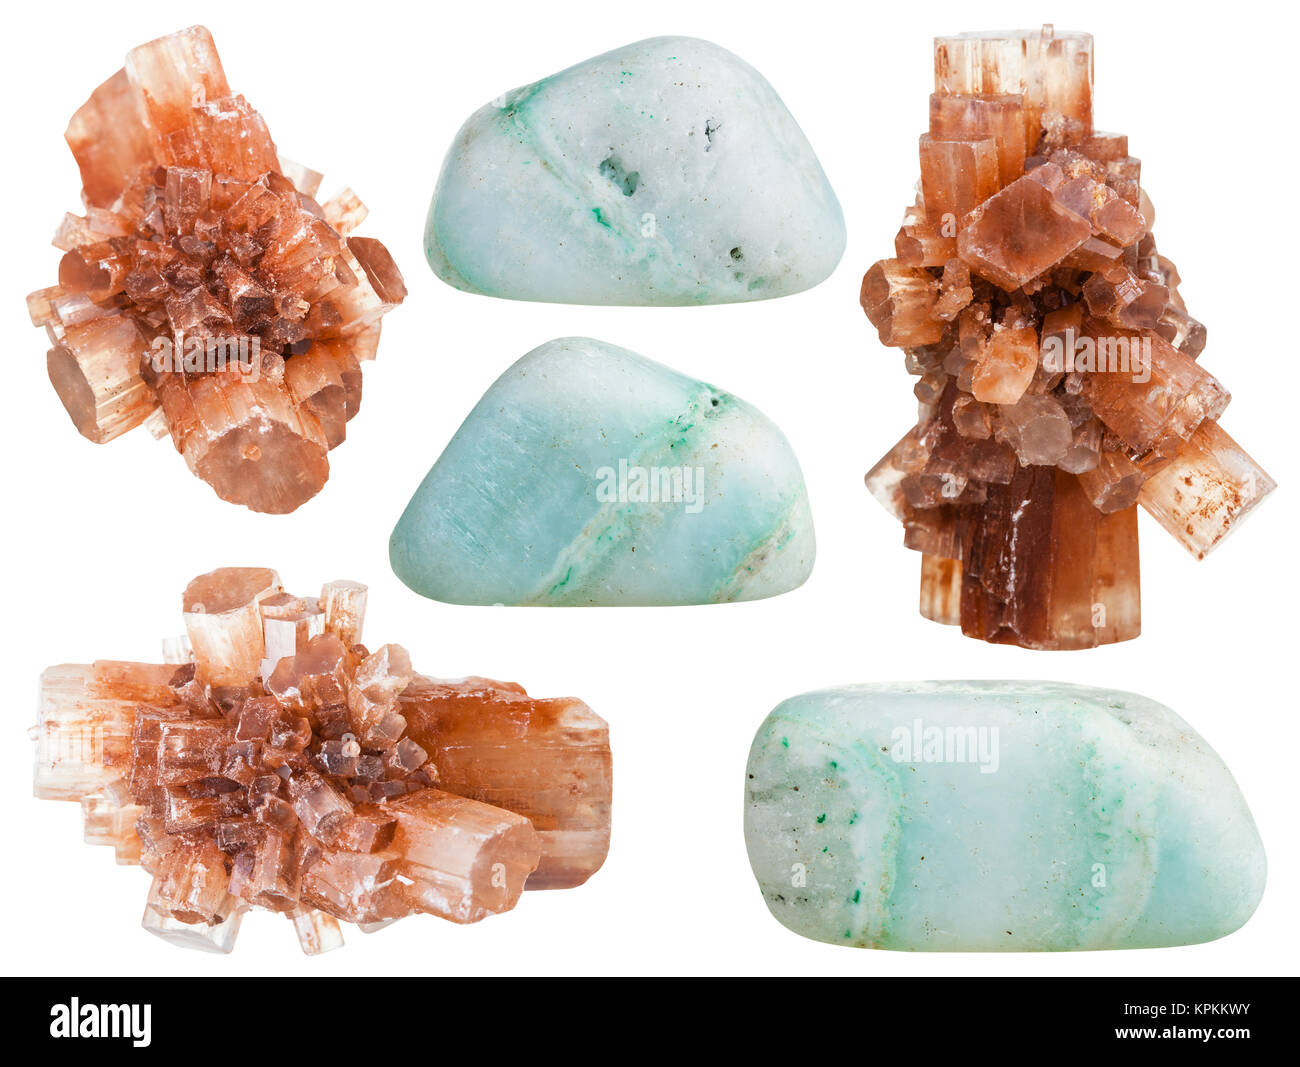 set of Aragonite crystals and polished stones Stock Photo